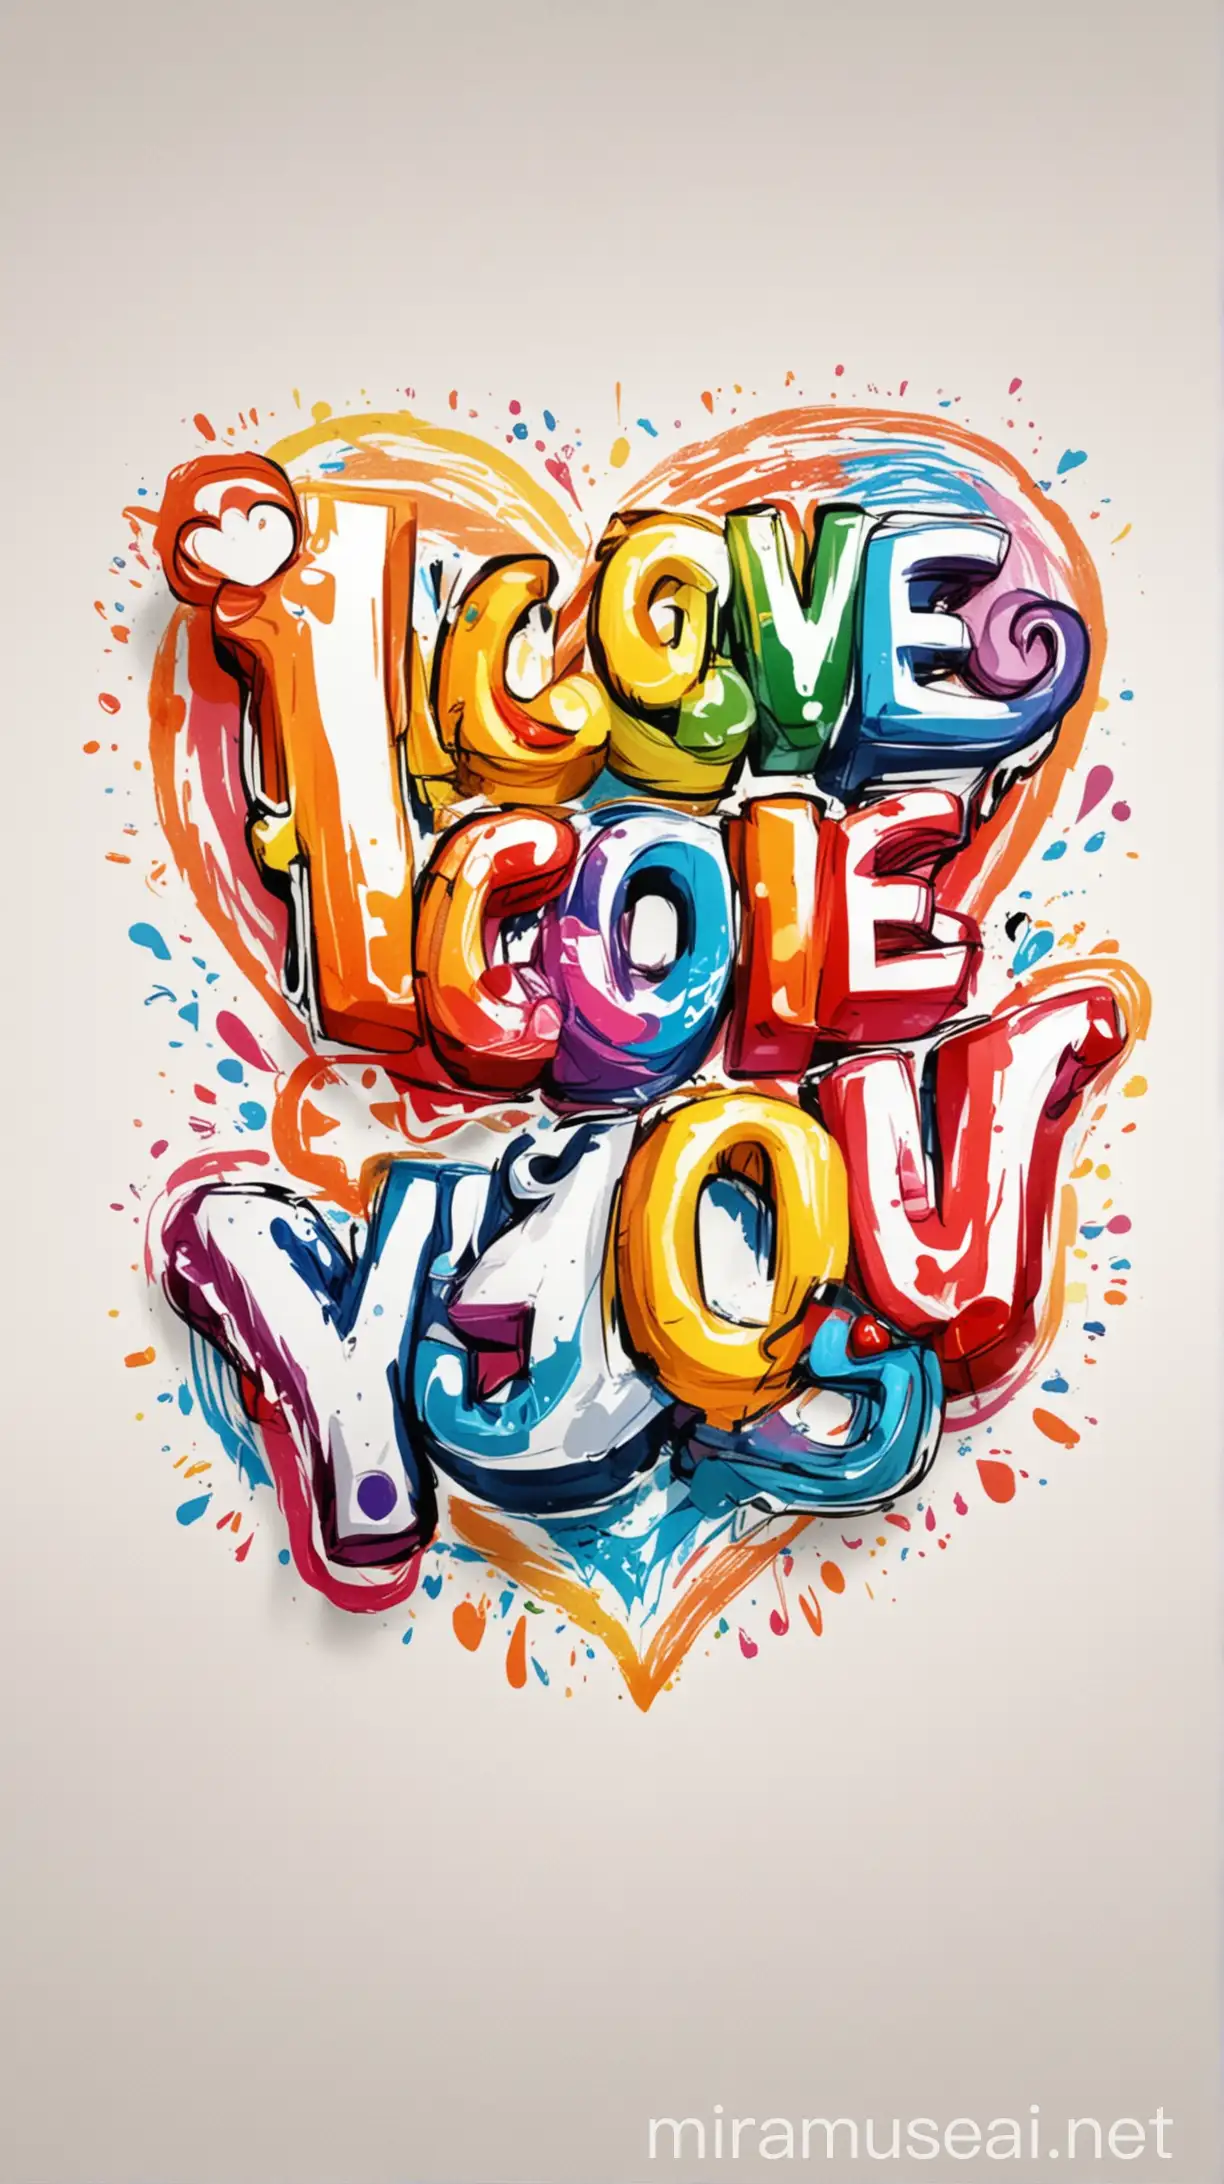 Colorful Cartoon I Love You Lettering on White Background